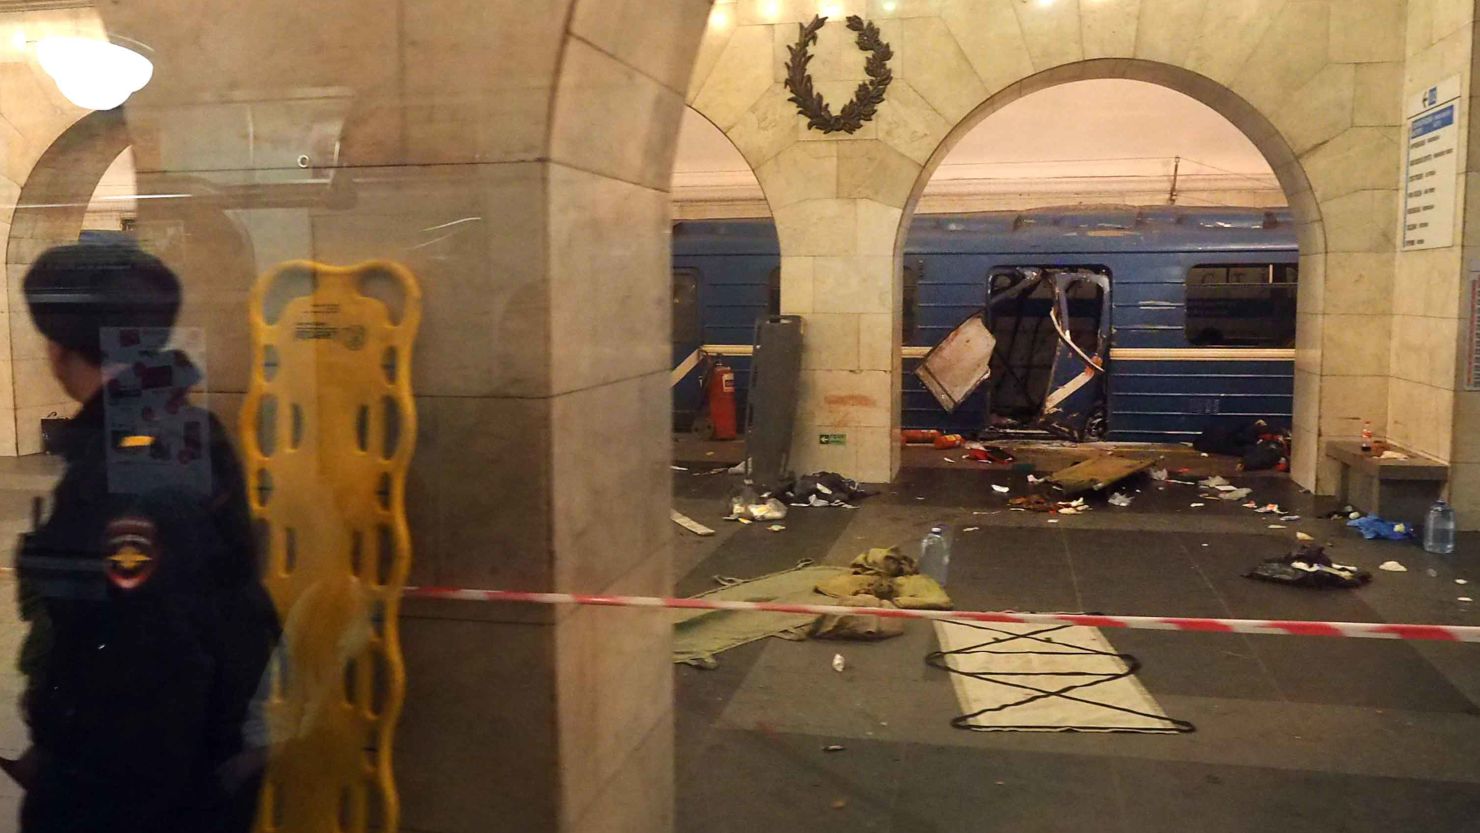 Fourteen people were killed and dozens injured at the Technological Institute metro station in St Petersburg on Monday.